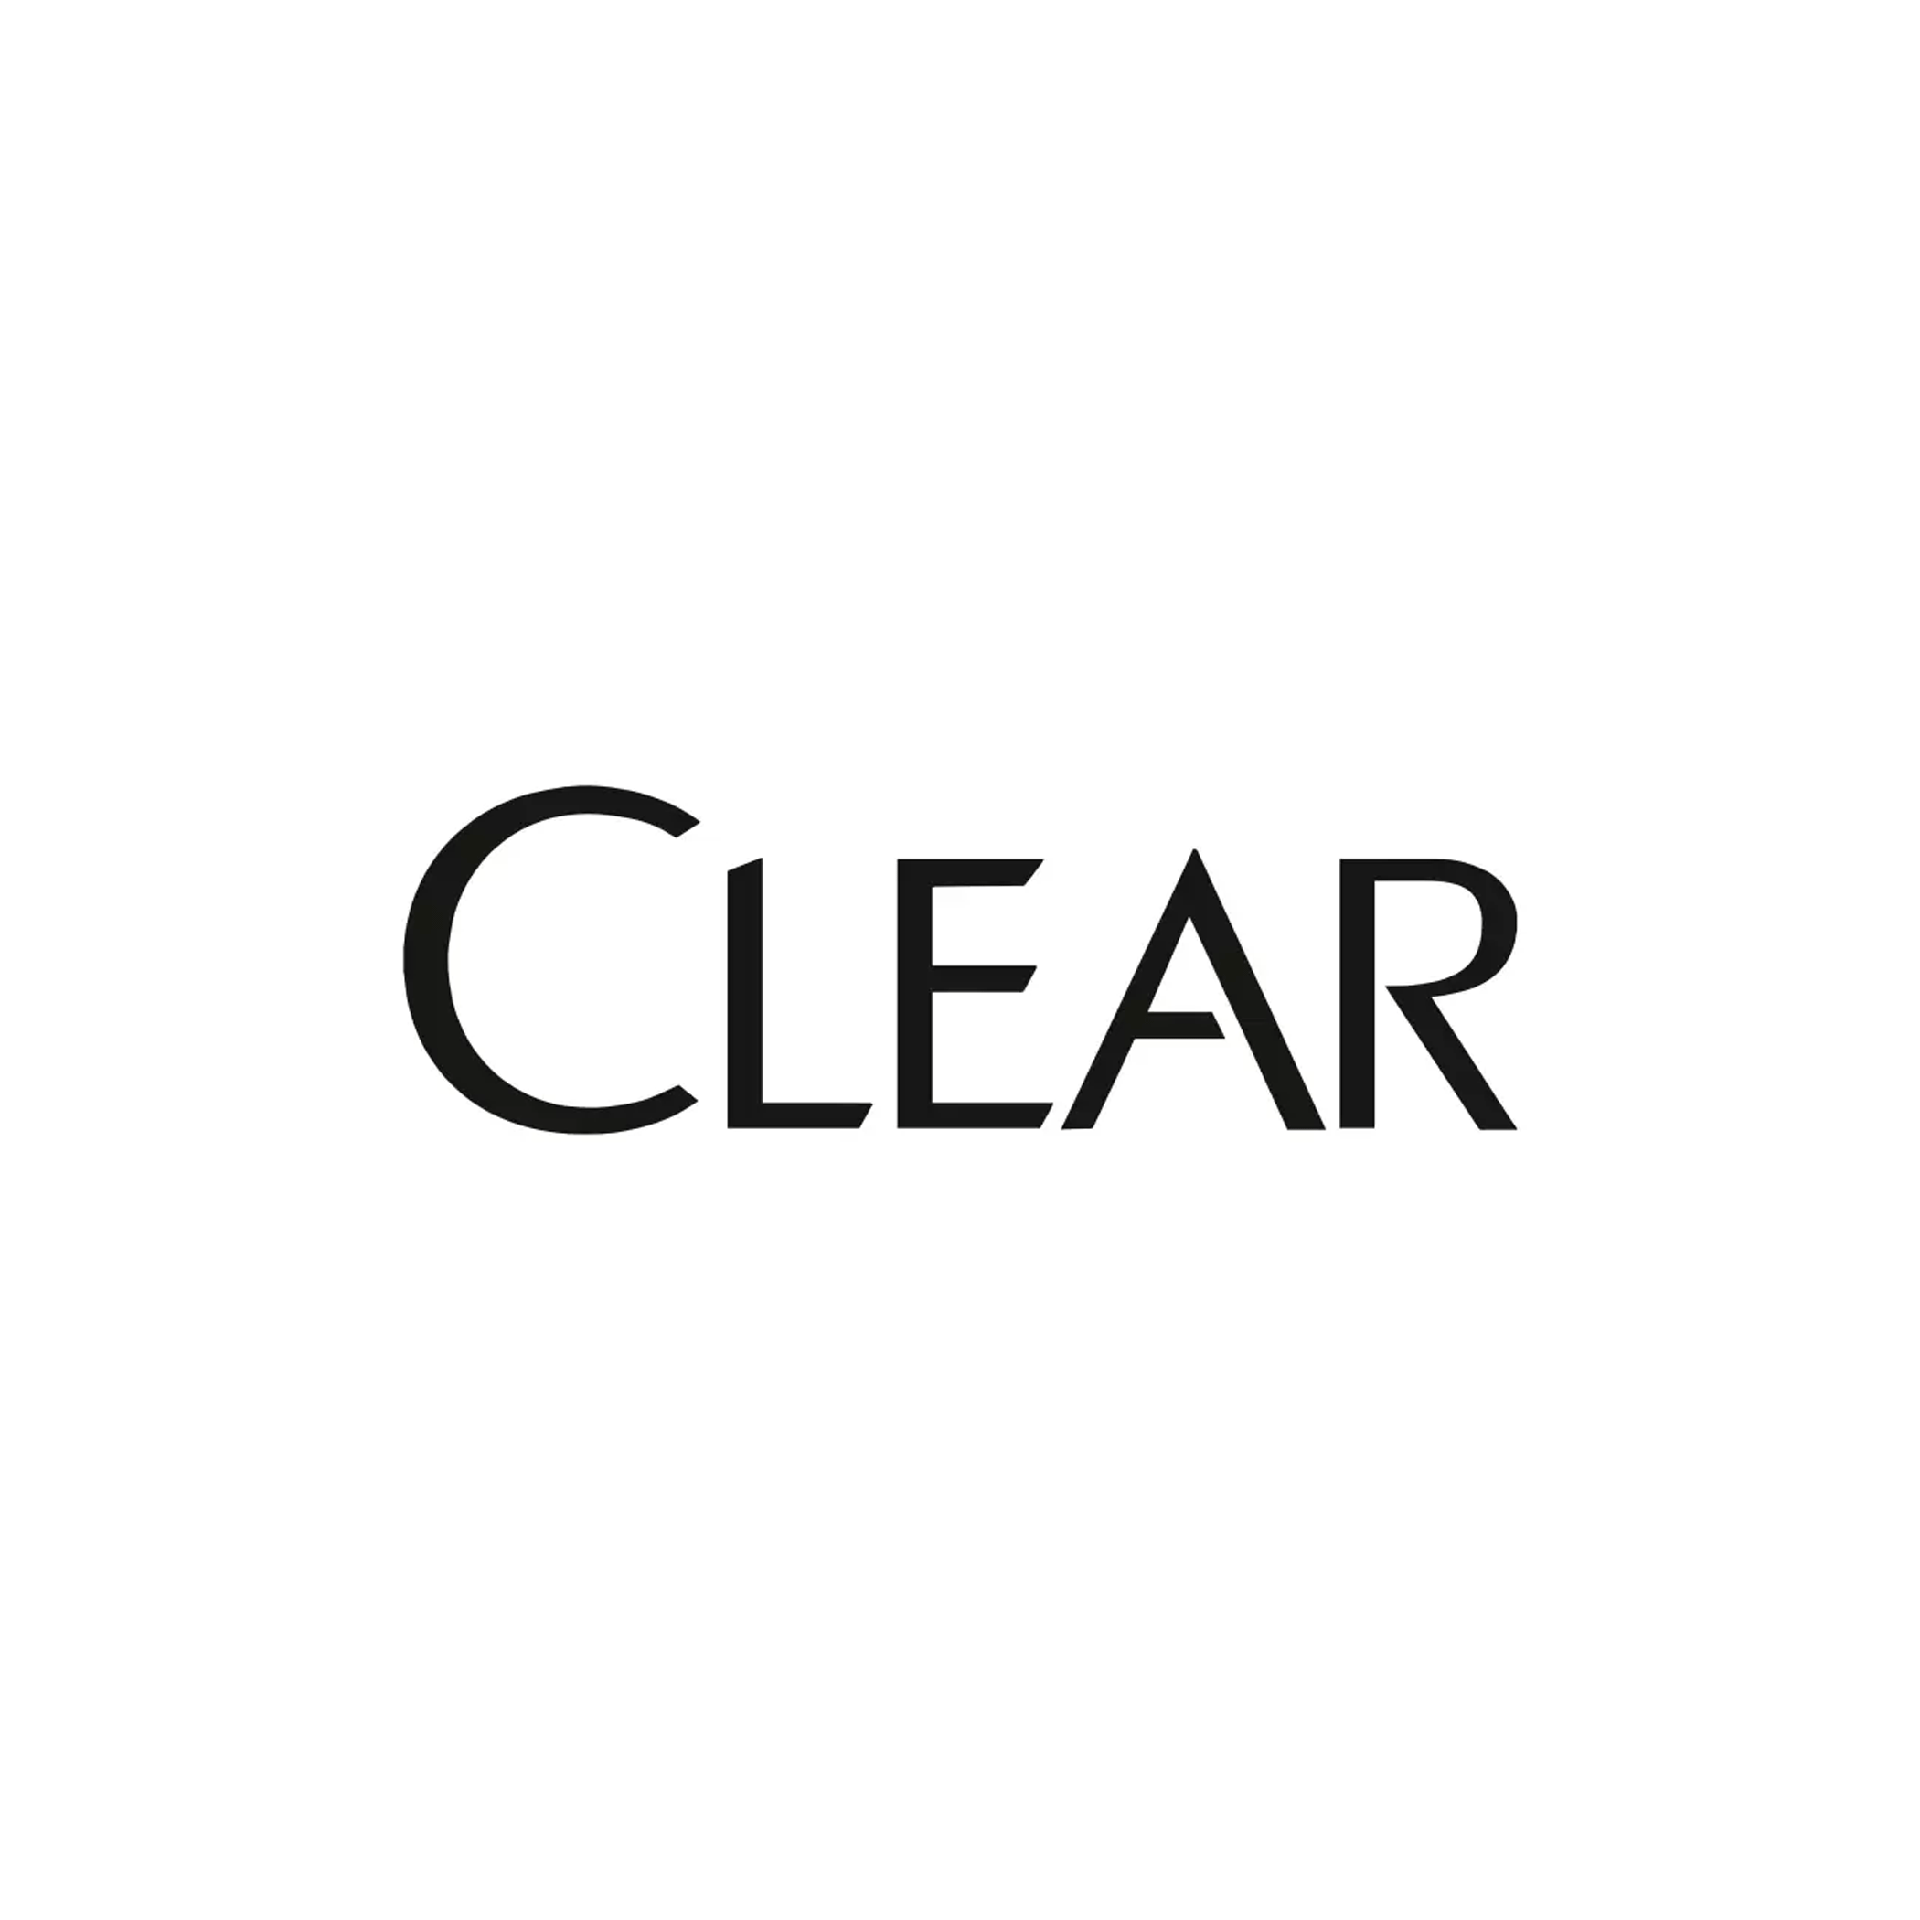 Product Brand: Clear